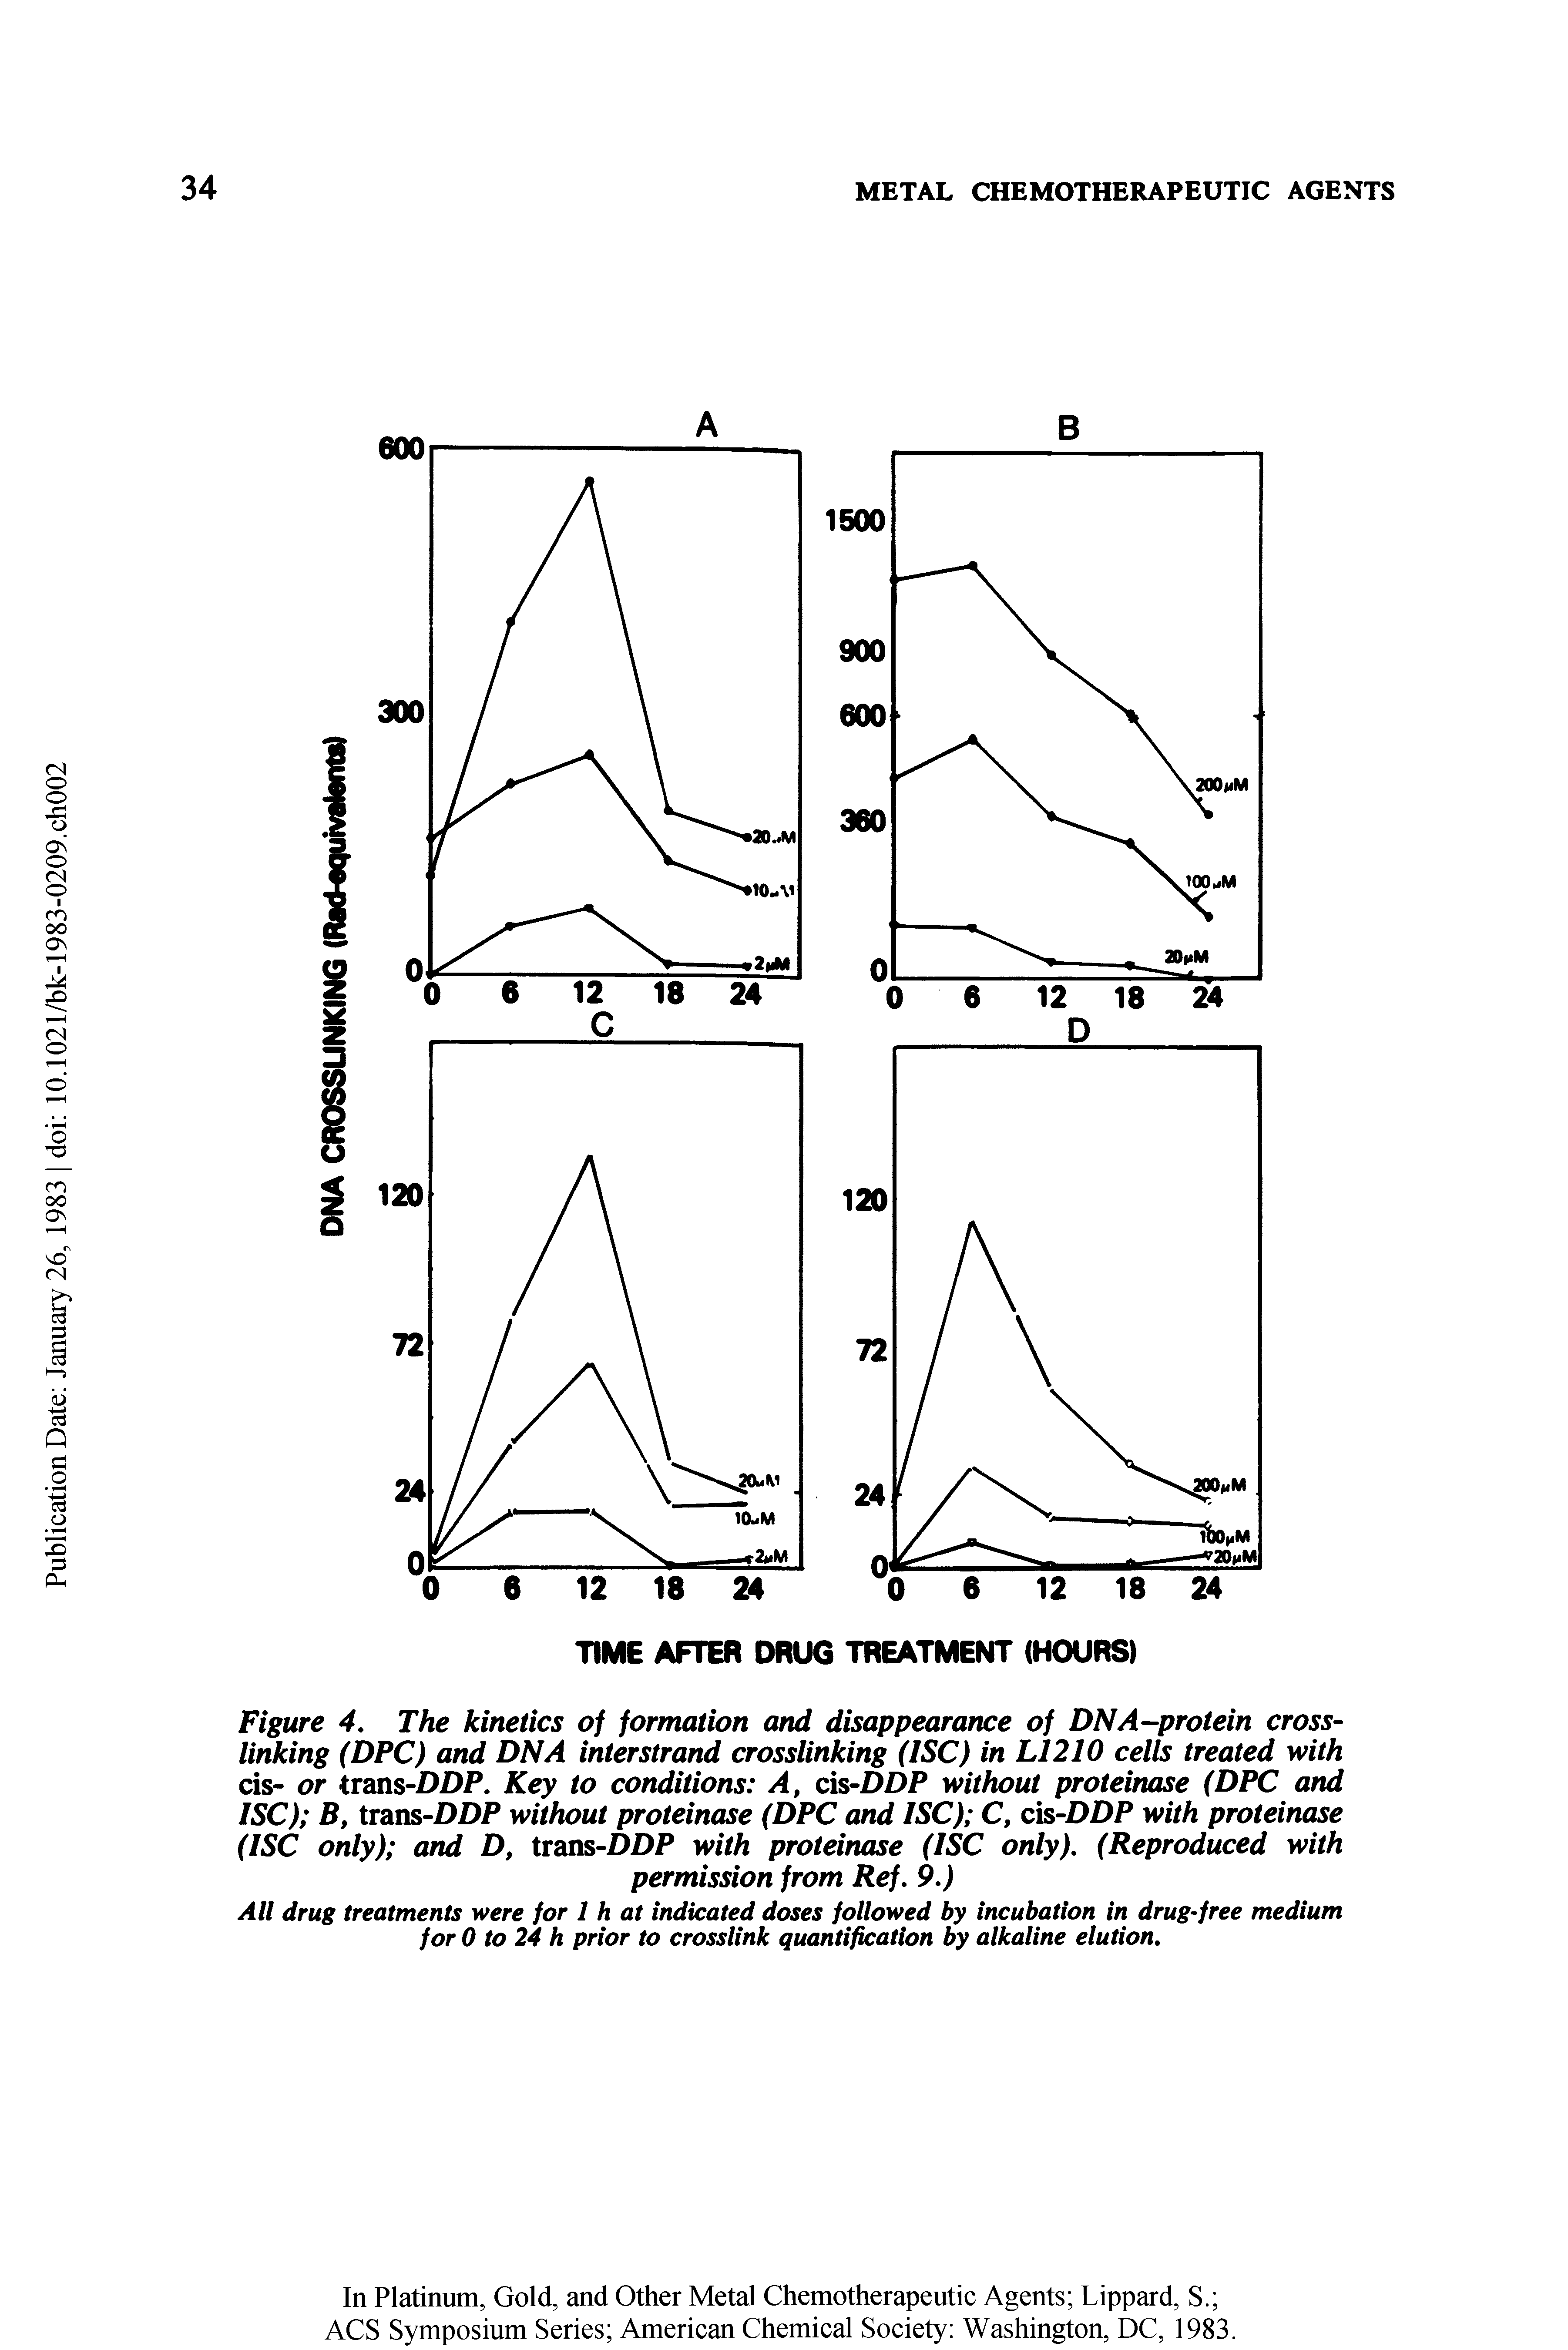 Figure 4, The kinetics of formation and disappearance of DNA-protein cross-linking (DPC) and DNA interstrand crosslinking (ISC) in L1210 cells treated with cis- or trans-DDP. Key to conditions A, cis-DDP without proteinase (DPC and ISC) B, trans-DDP without proteinase (DPC and ISC) C, cis-DDP with proteinase (ISC only) and D, trans-DDP with proteinase (ISC only). (Reproduced with...